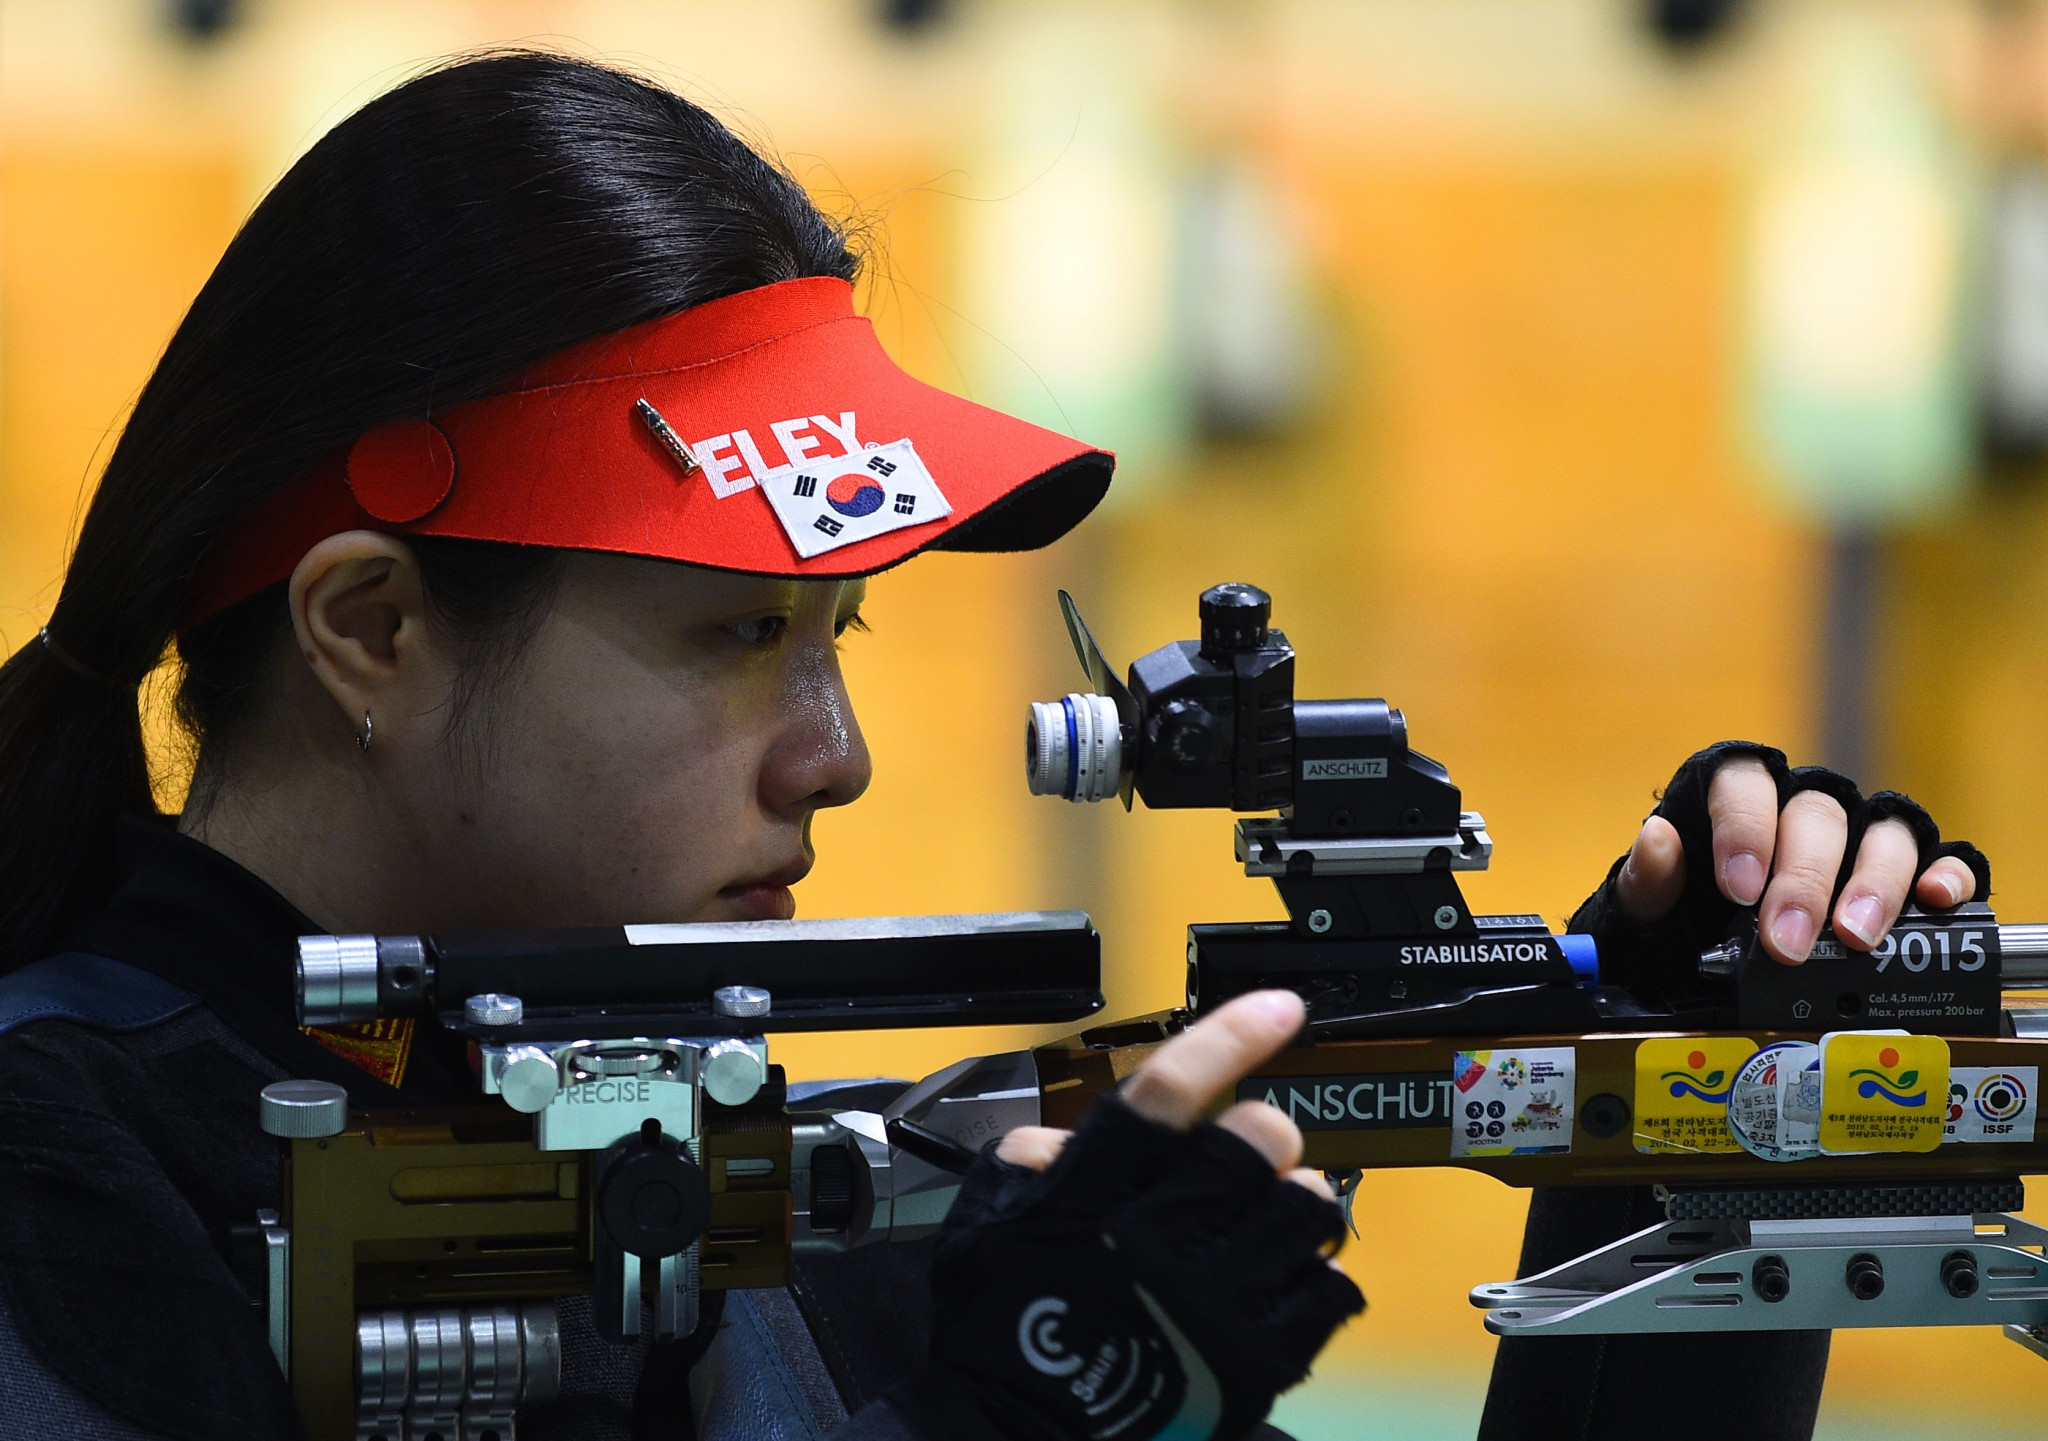 The ISSF have announced the cancellation of two of their World Cup events in New Delhi and Baku ©ISSF